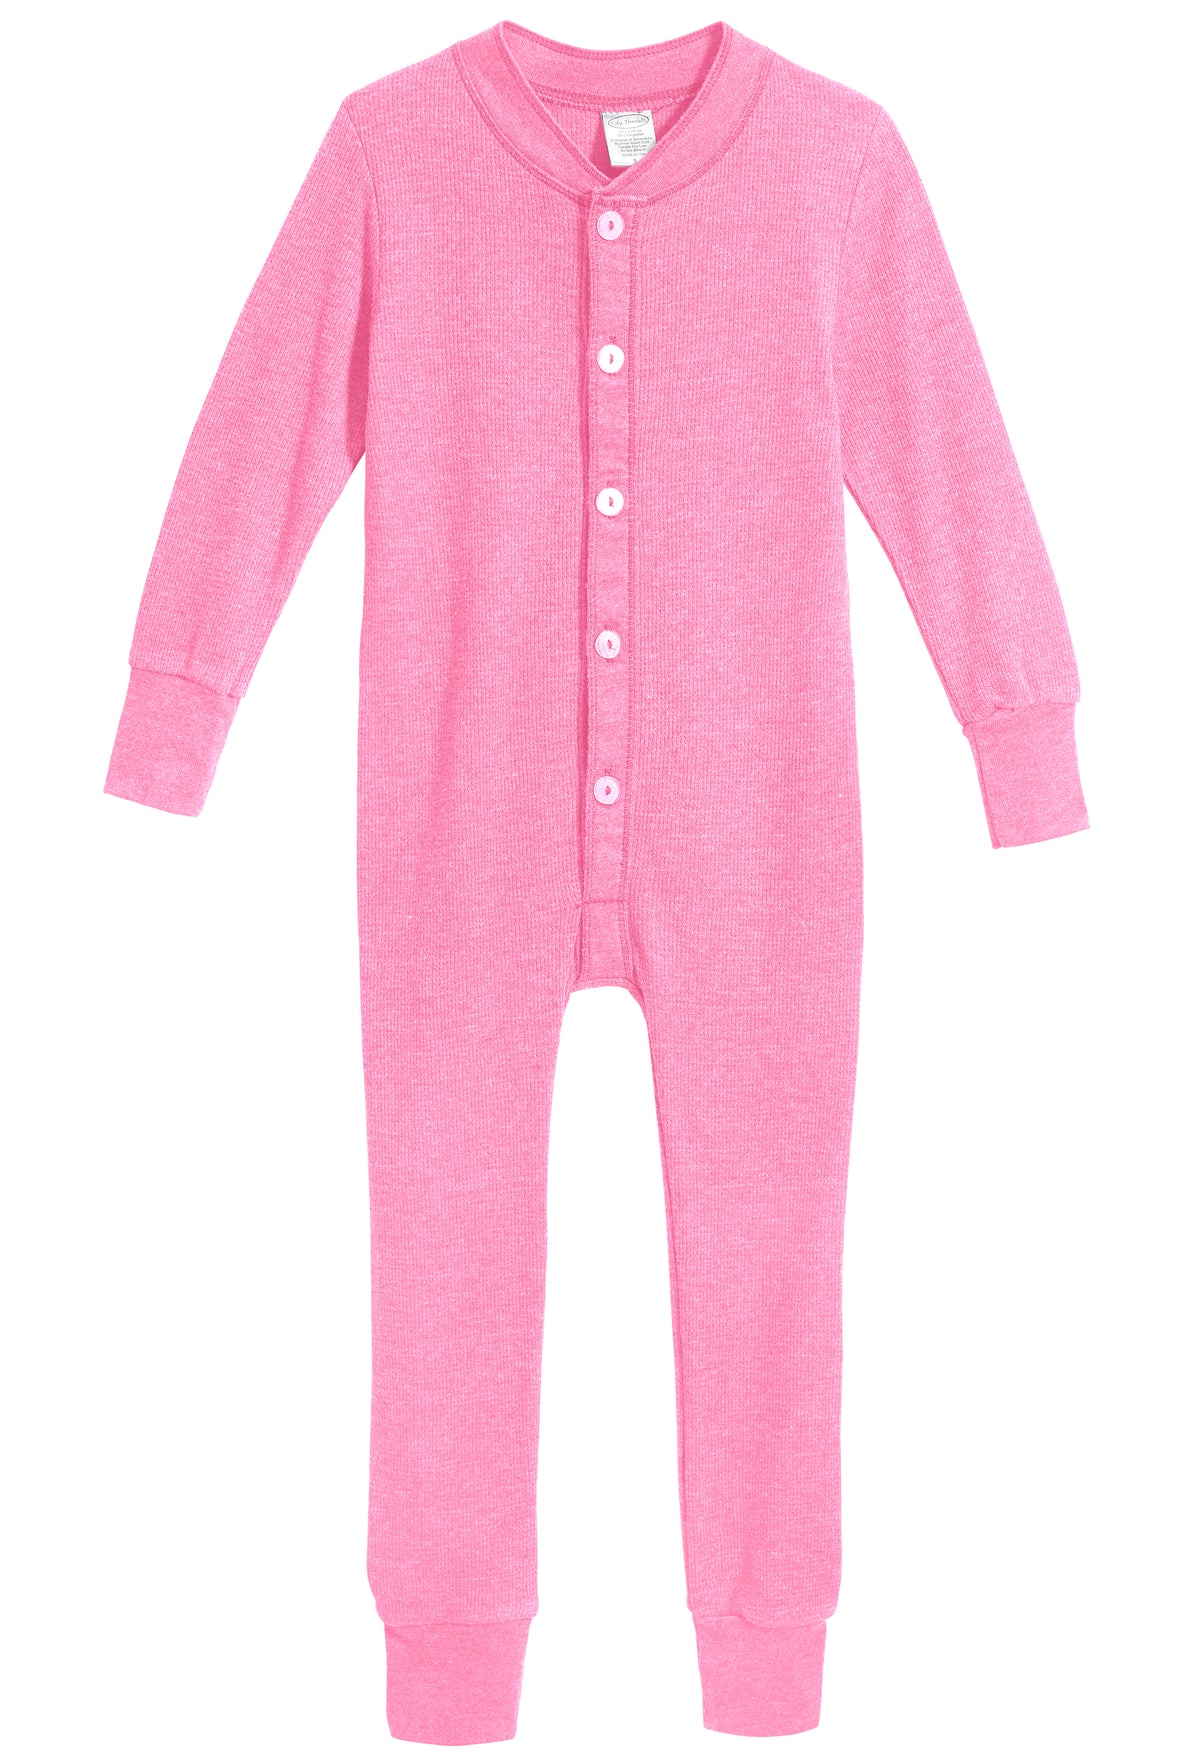 Boys and Girls Soft &amp; Cozy Thermal One- Piece Union Suit  | Medium Pink